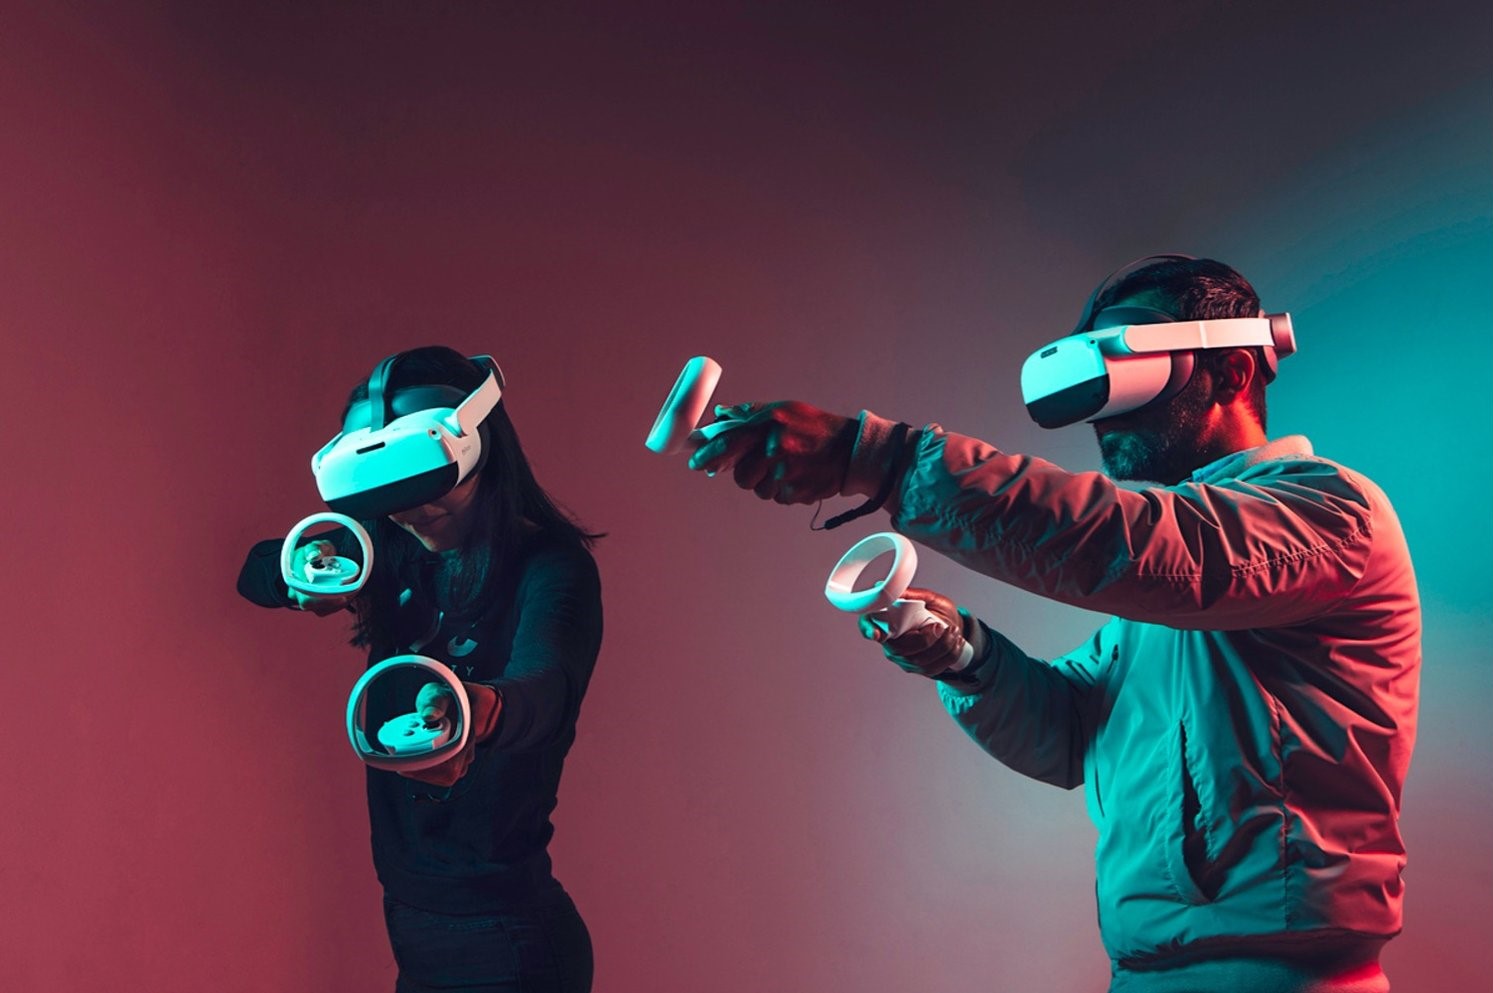 2 People wearing VR Headsets and playing with controllers